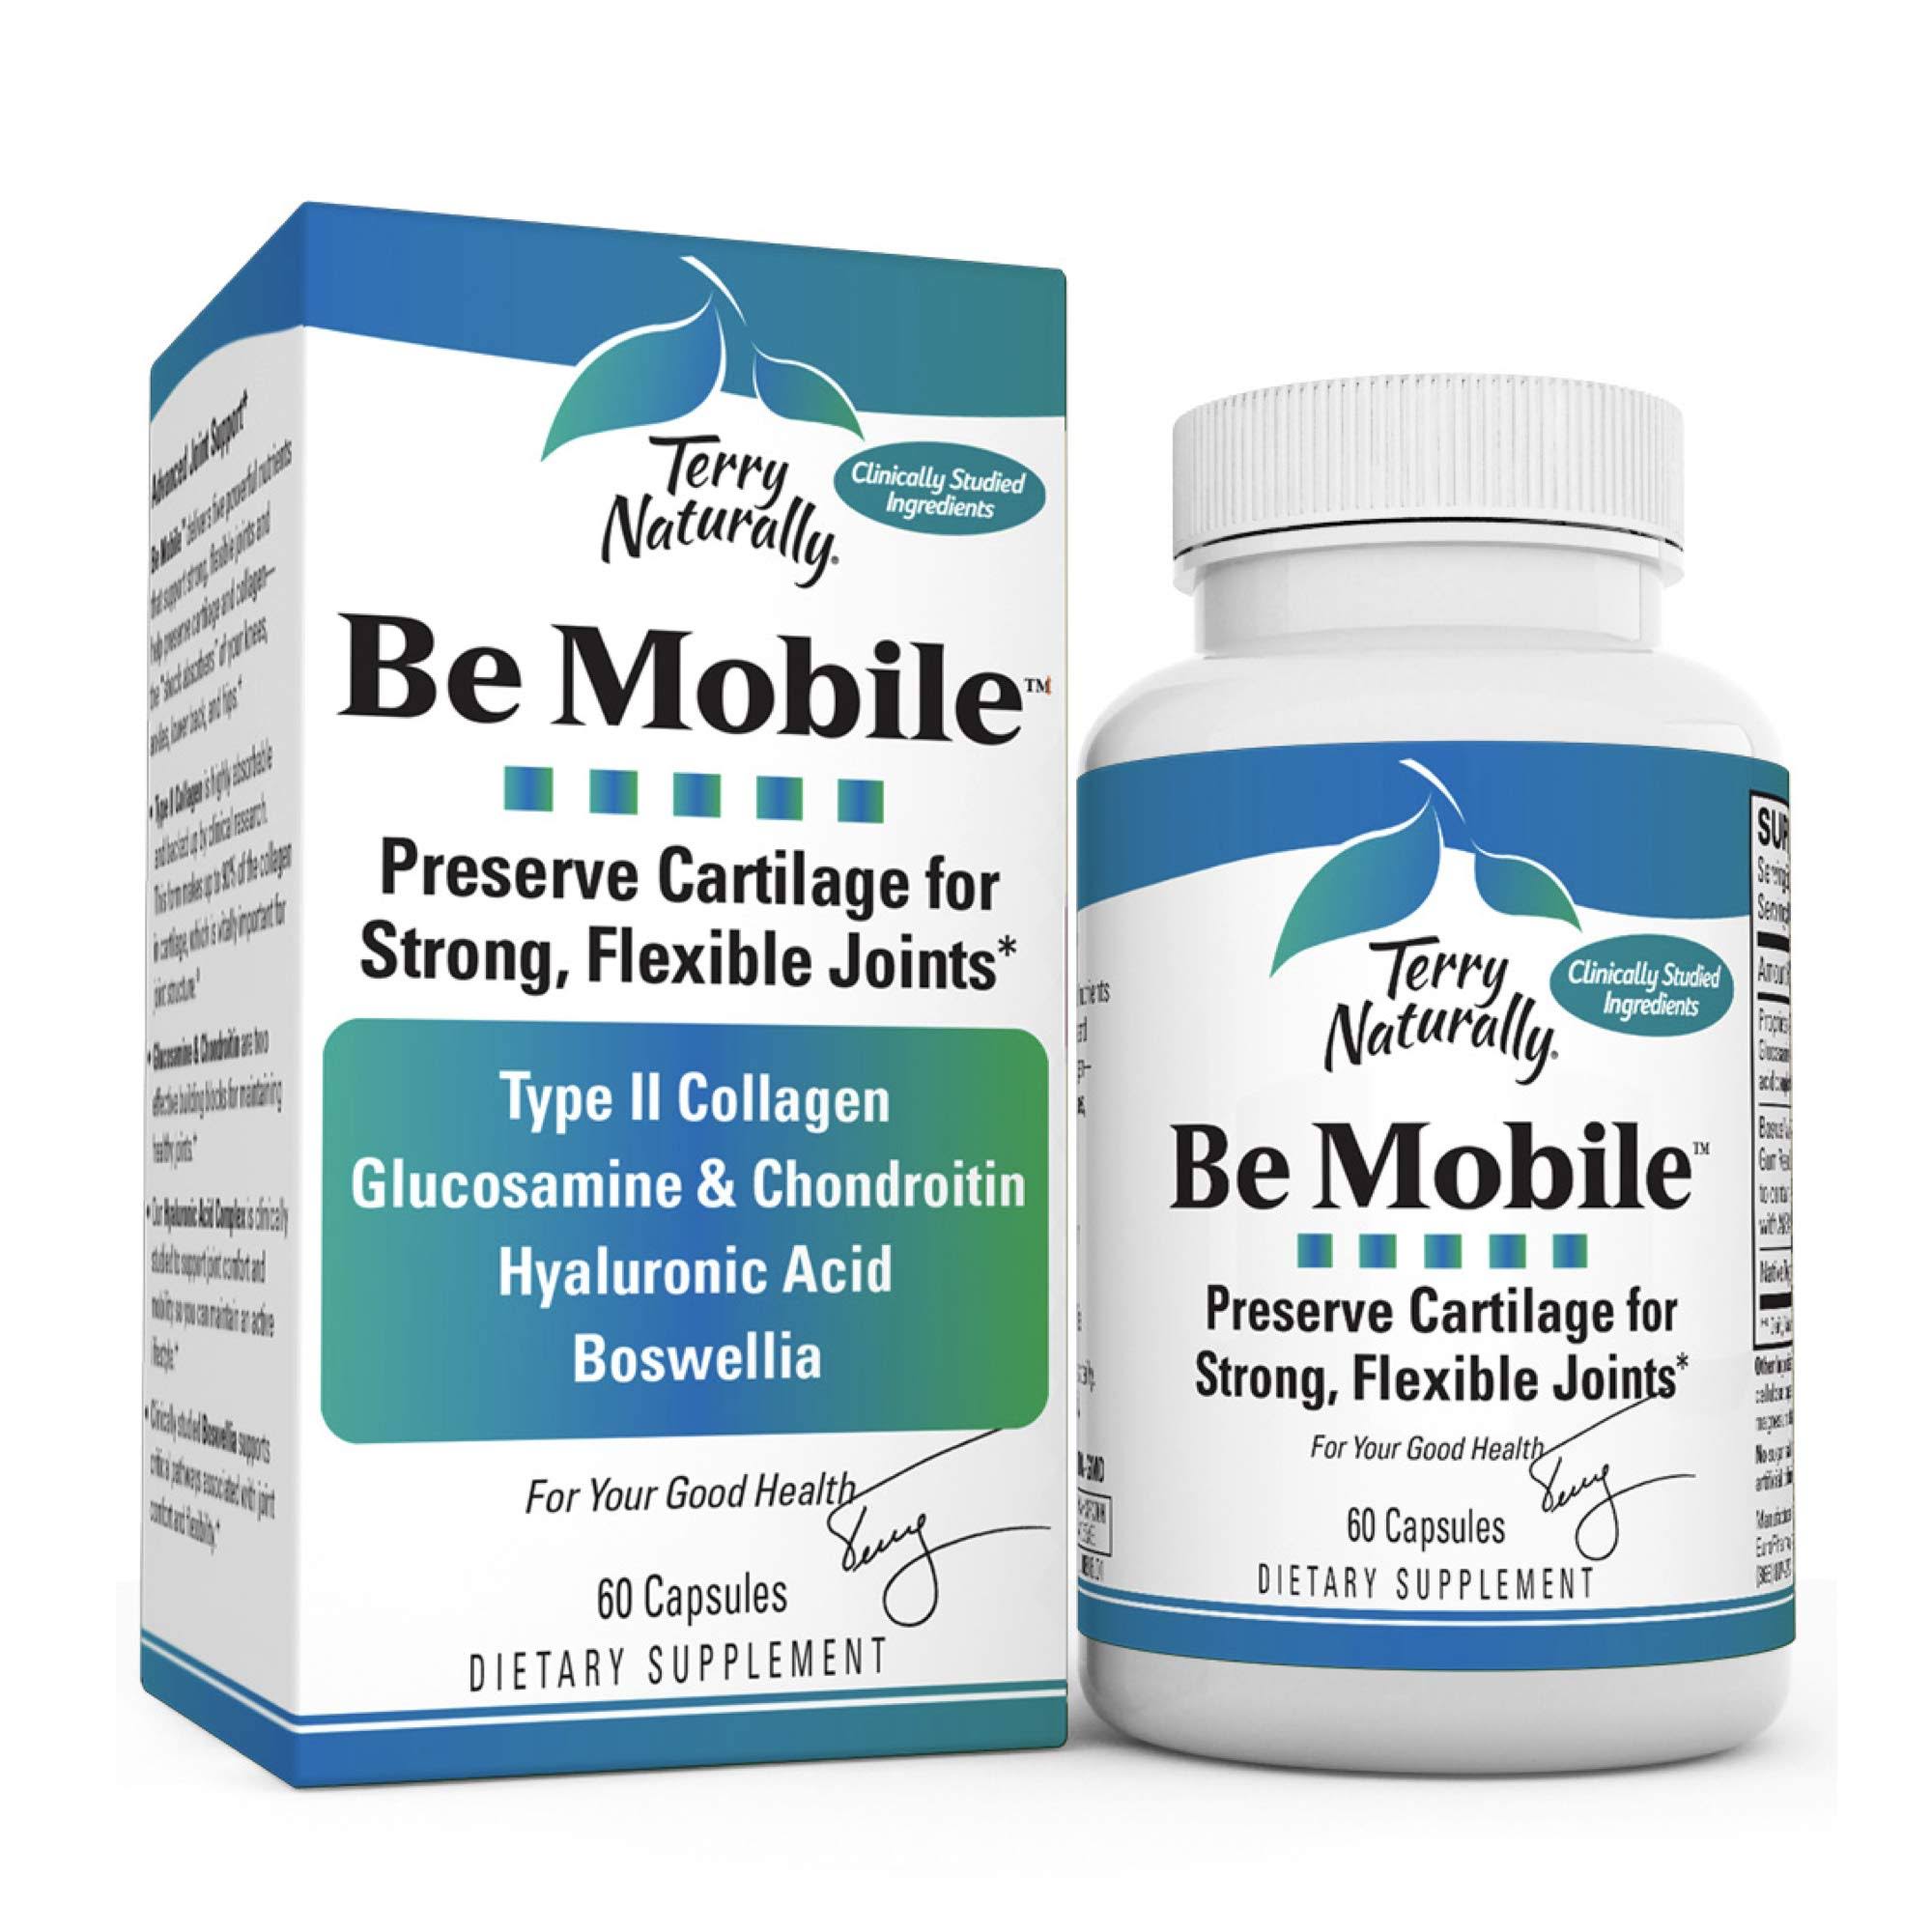 Terry Naturally Be Mobile (60 Capsules)